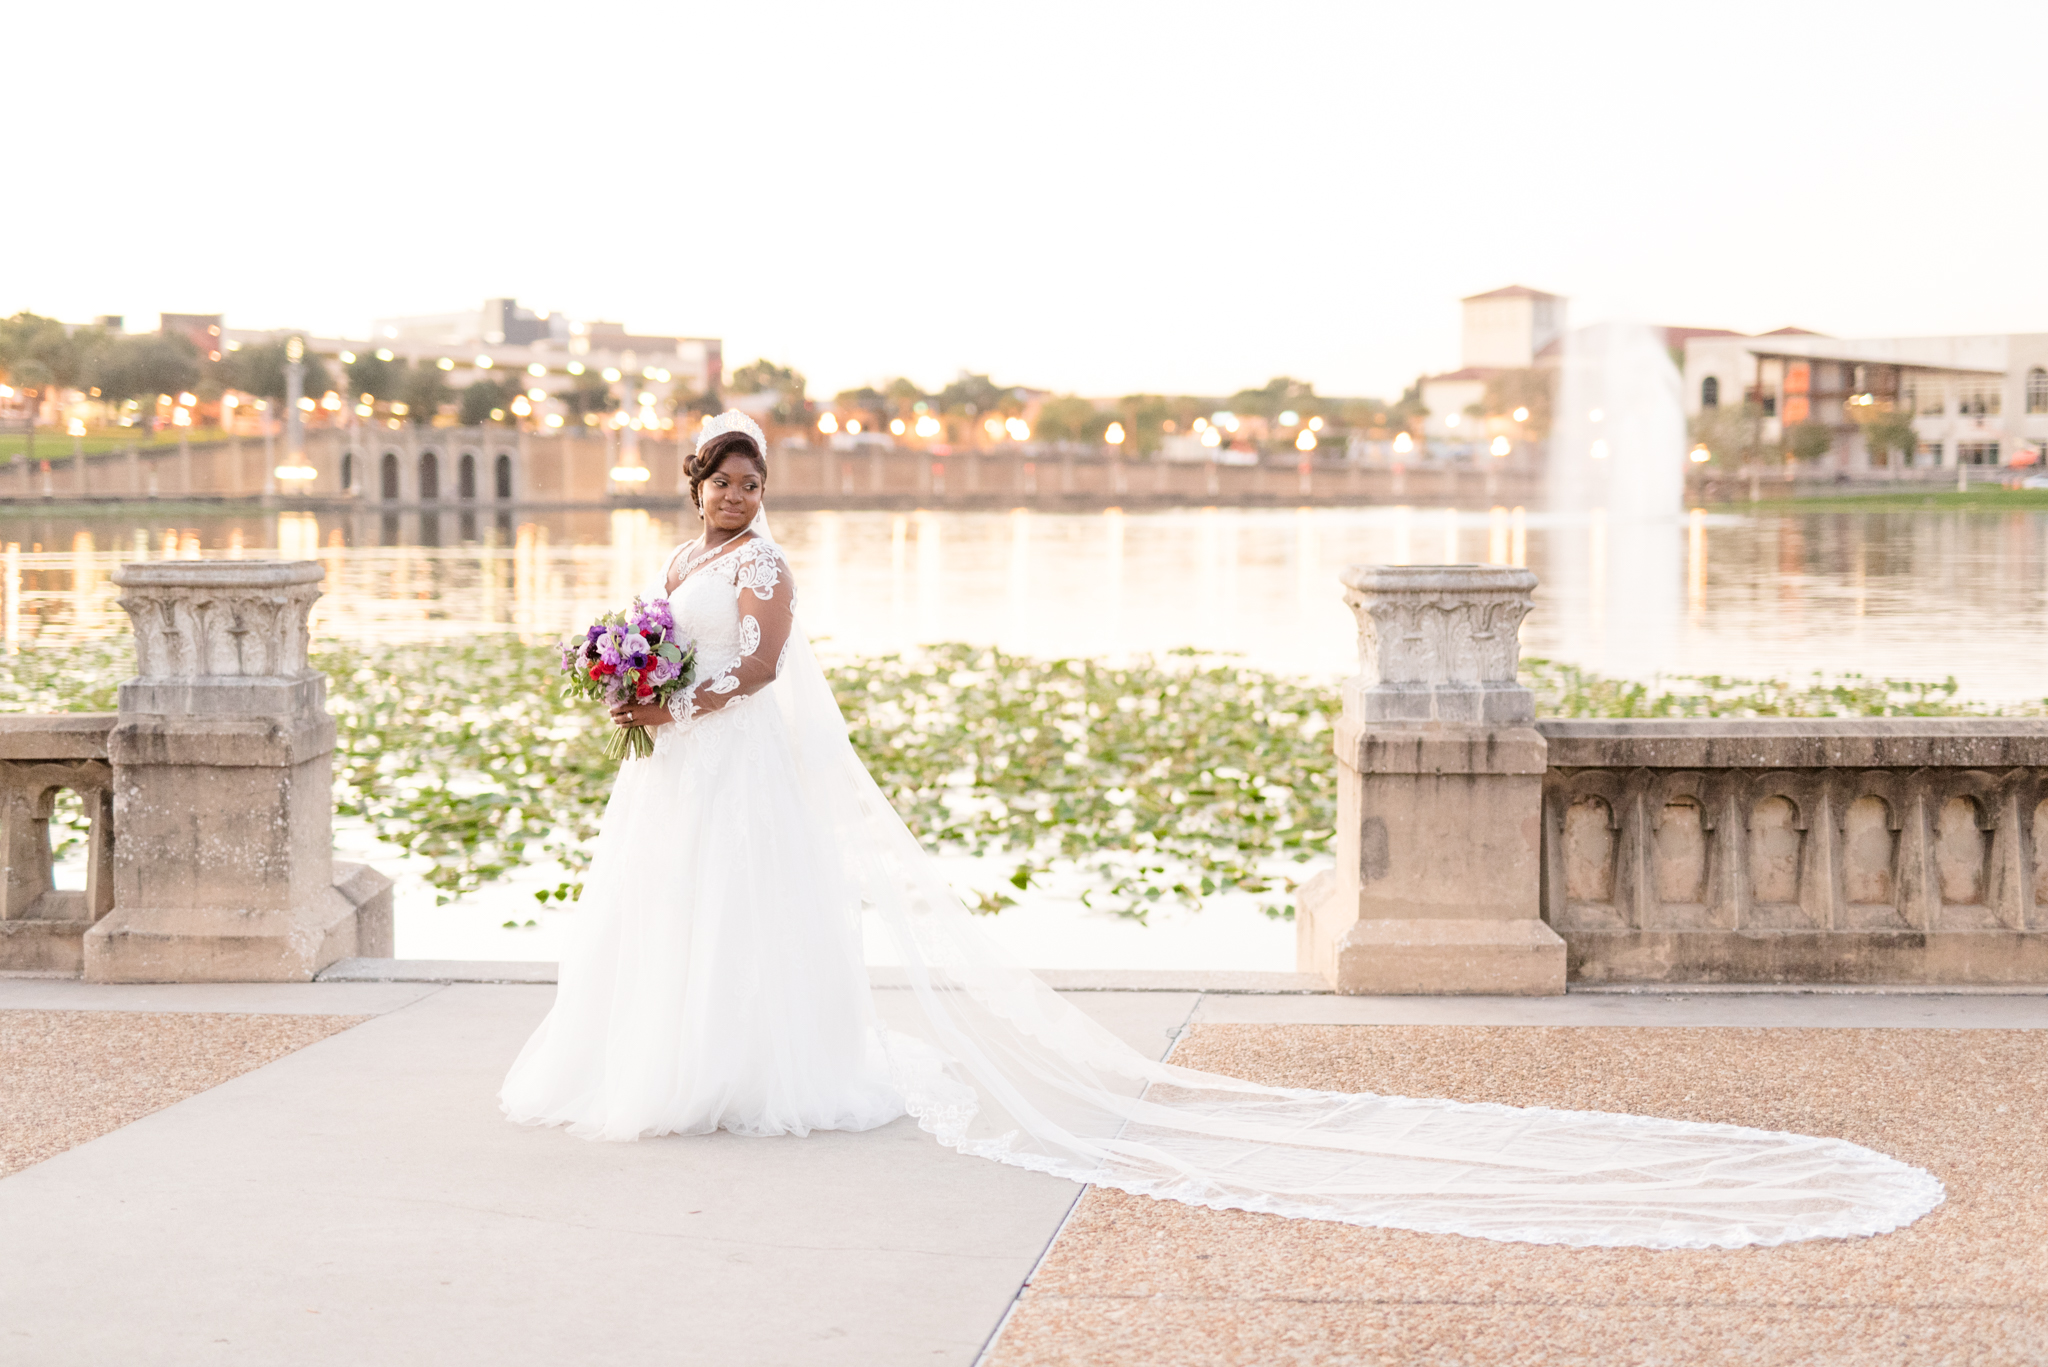 Bride looks over shoulder by lake at sunset.